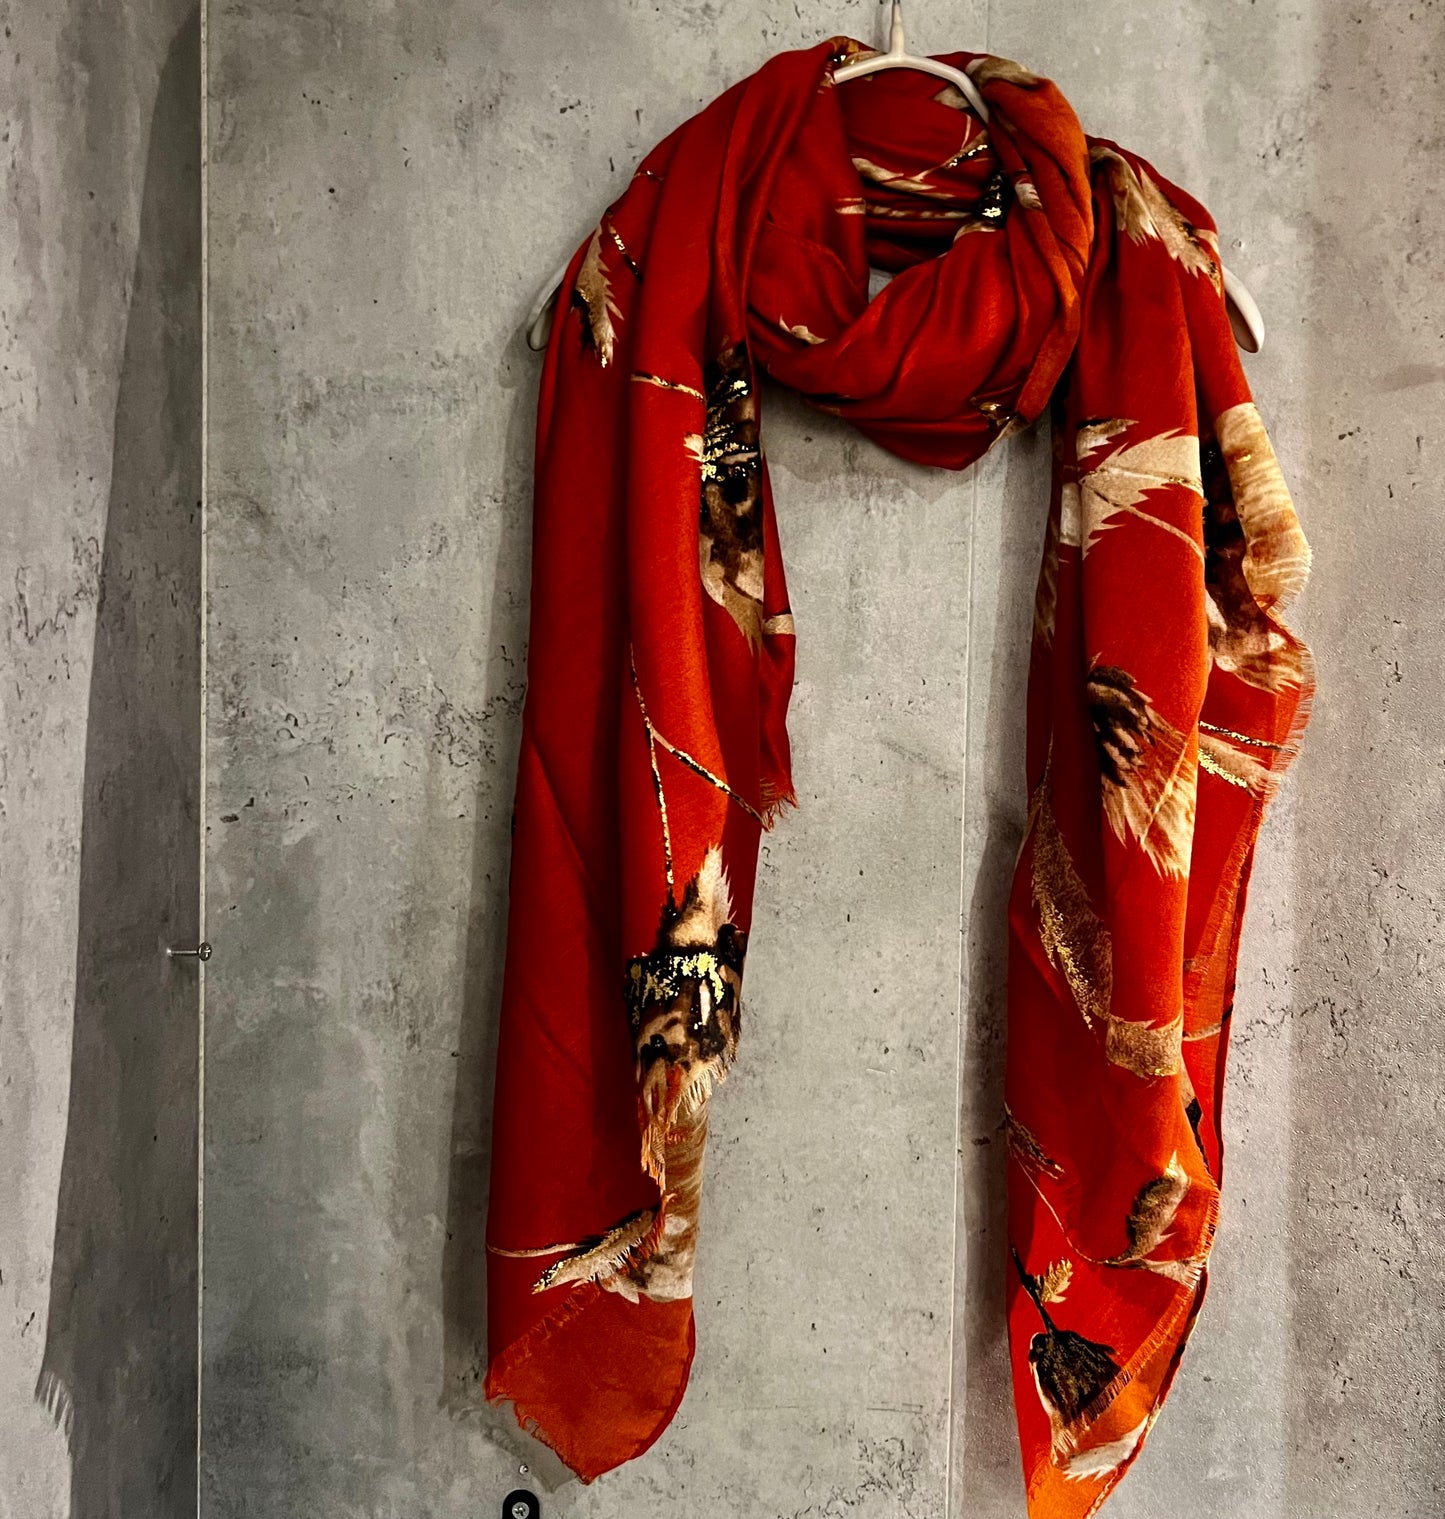 Thistle Flowers Gold Dusk Orange Cotton Scarf/Spring Summer Autumn Scarf/Scarf Women/Gift For Her Birthday Christmas/Gifts For Mum/UK Seller